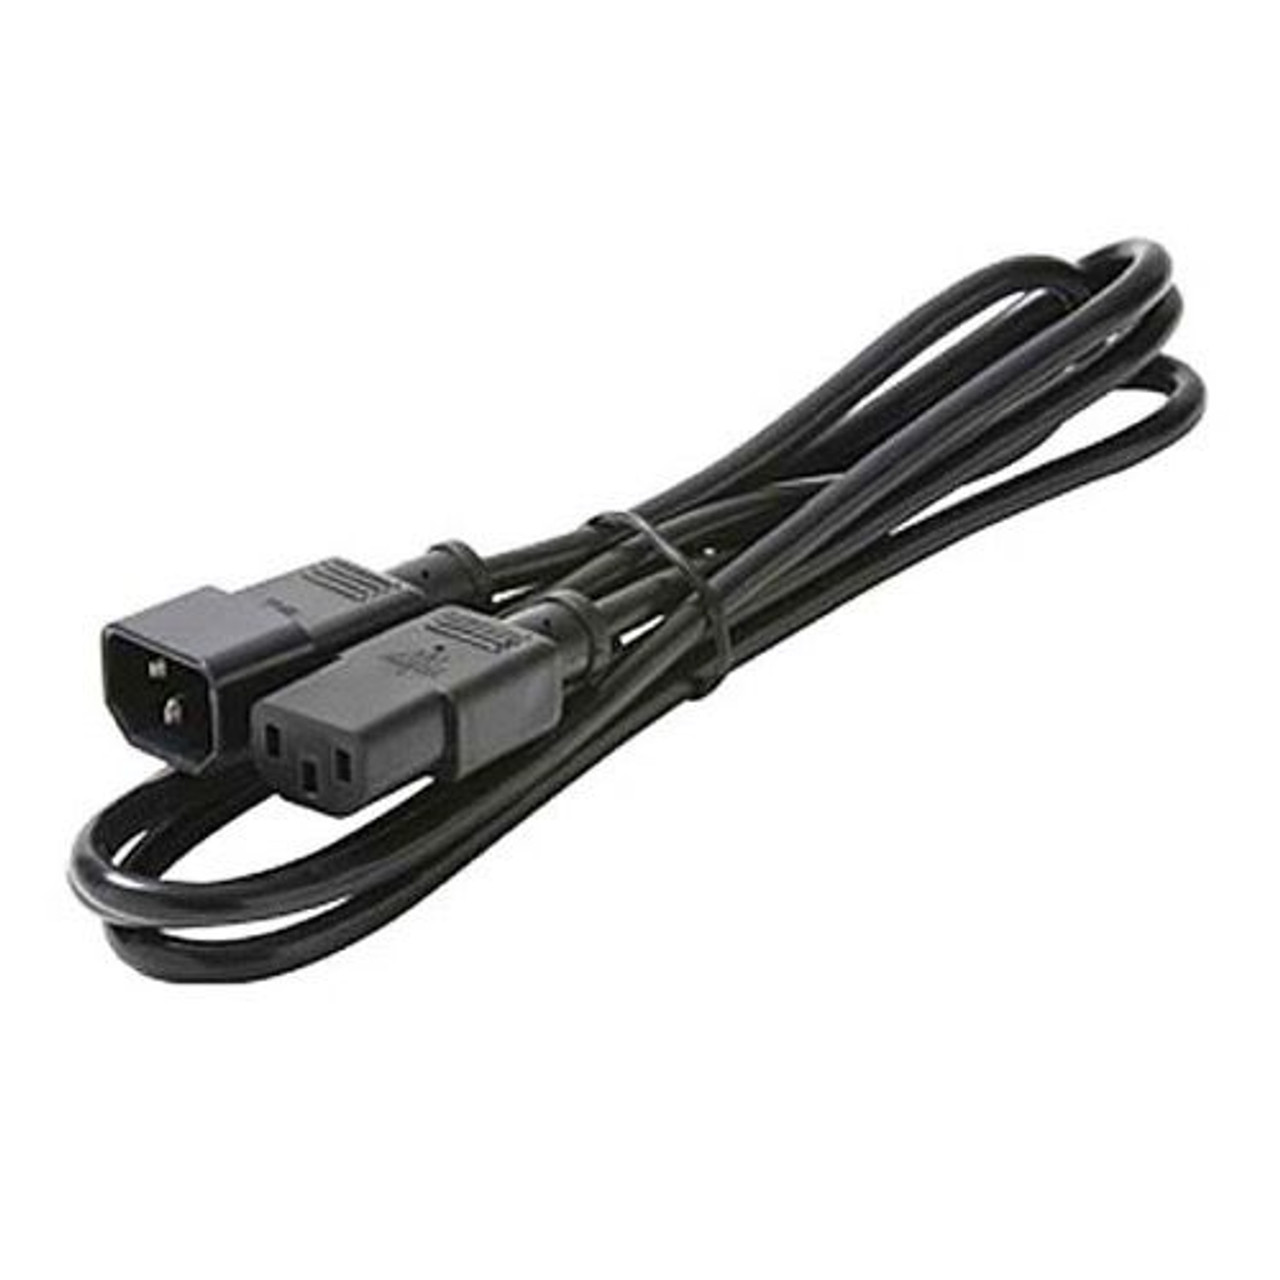 Steren 505-370 6' FT Computer Power Cord Extension 18/3 Conductor Stranded Copper AC 120 Volt 1875 Watt UL Listed 15 Amp Double Insulated Grounded Black Jacket 18 AWG Cable, Part # 505370